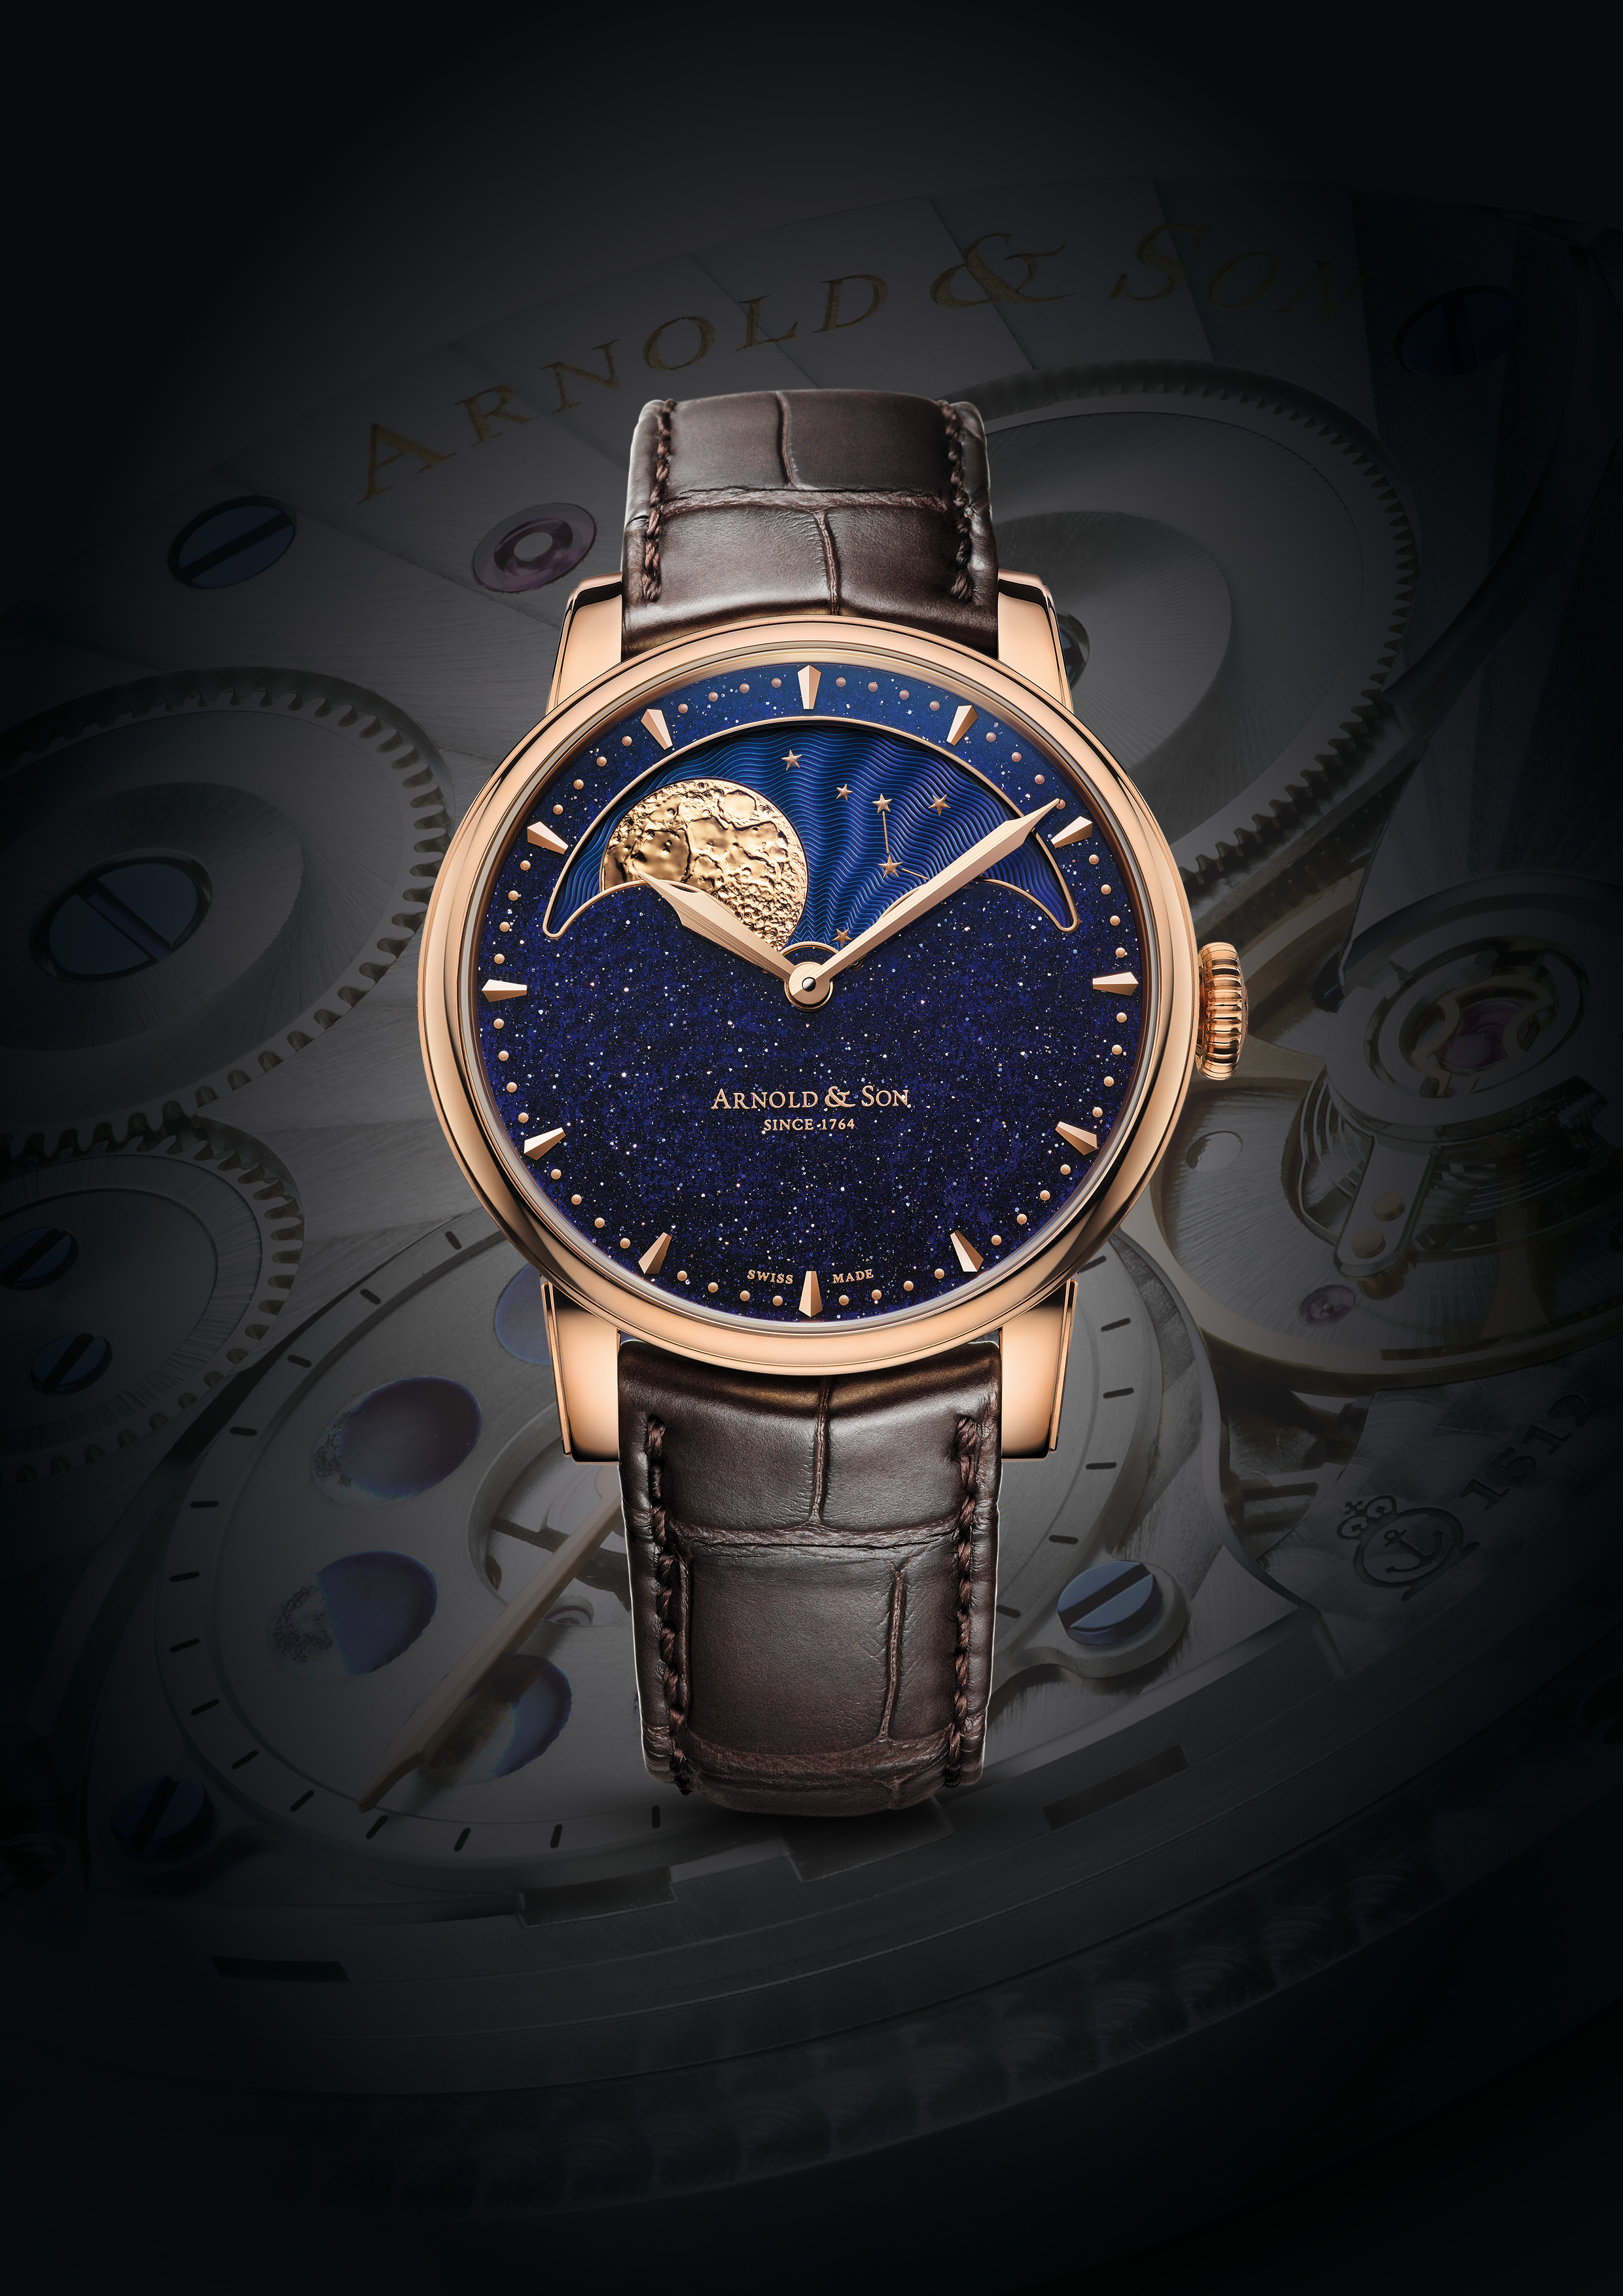 The 18K red gold mechanical timepiece comes in a limited edition of 28 pieces. Featuring a blue aventurine dial with a solid gold moon phase, the 42mm piece comes with an exclusive Arnold & Son mechanical hand-wound calibre A&S1512 developed especially for the moon phase complication and is equipped with a 90-hour power reserve. Resting on a hand-stitched alligator strap, the new HM Perpetual Moon Aventurine is priced at CHF 31,900 (approx.).